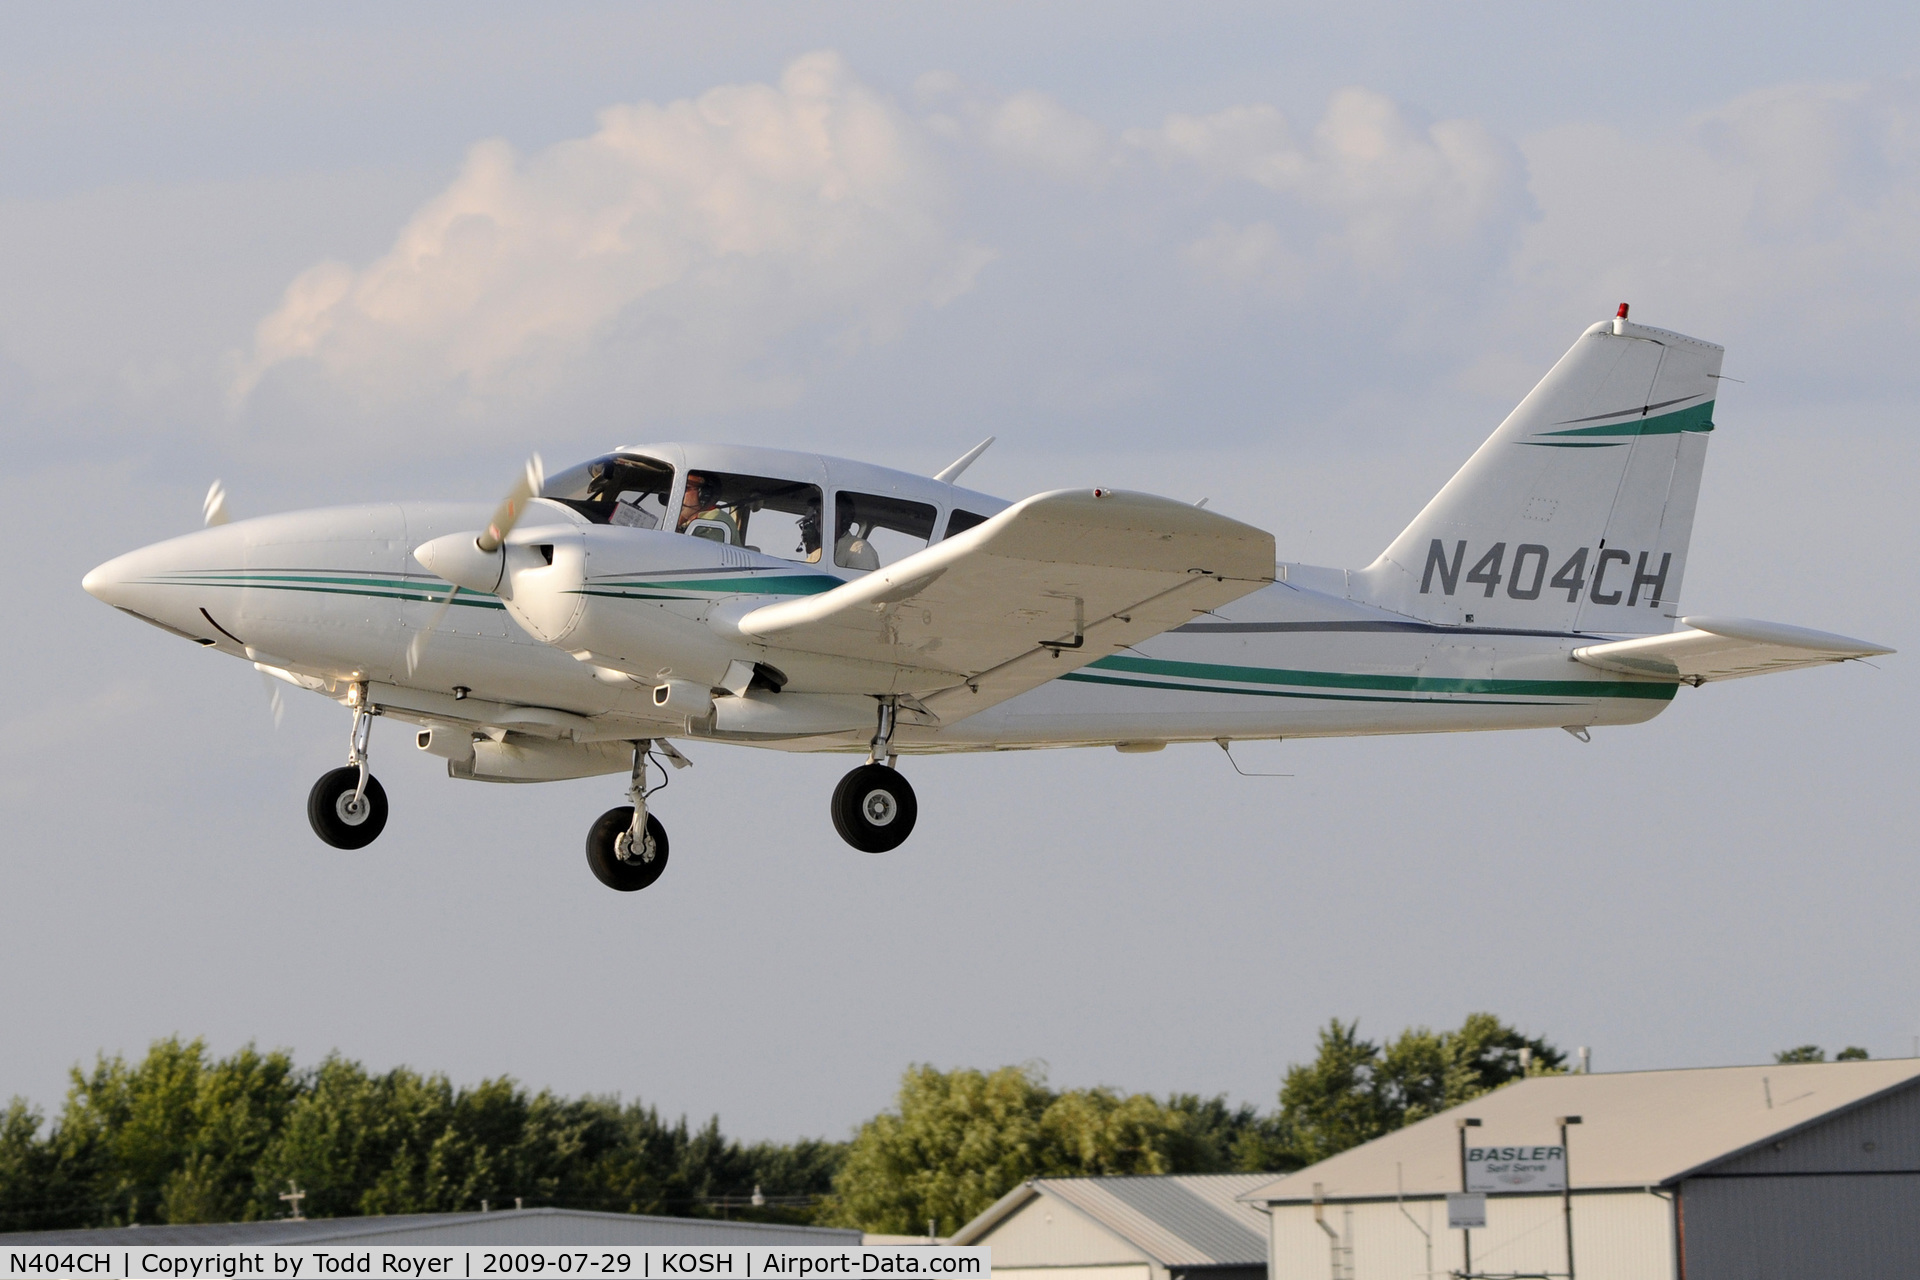 N404CH, 1976 Piper PA-23-250 Aztec C/N 27-7654191, Departing OSH on 27